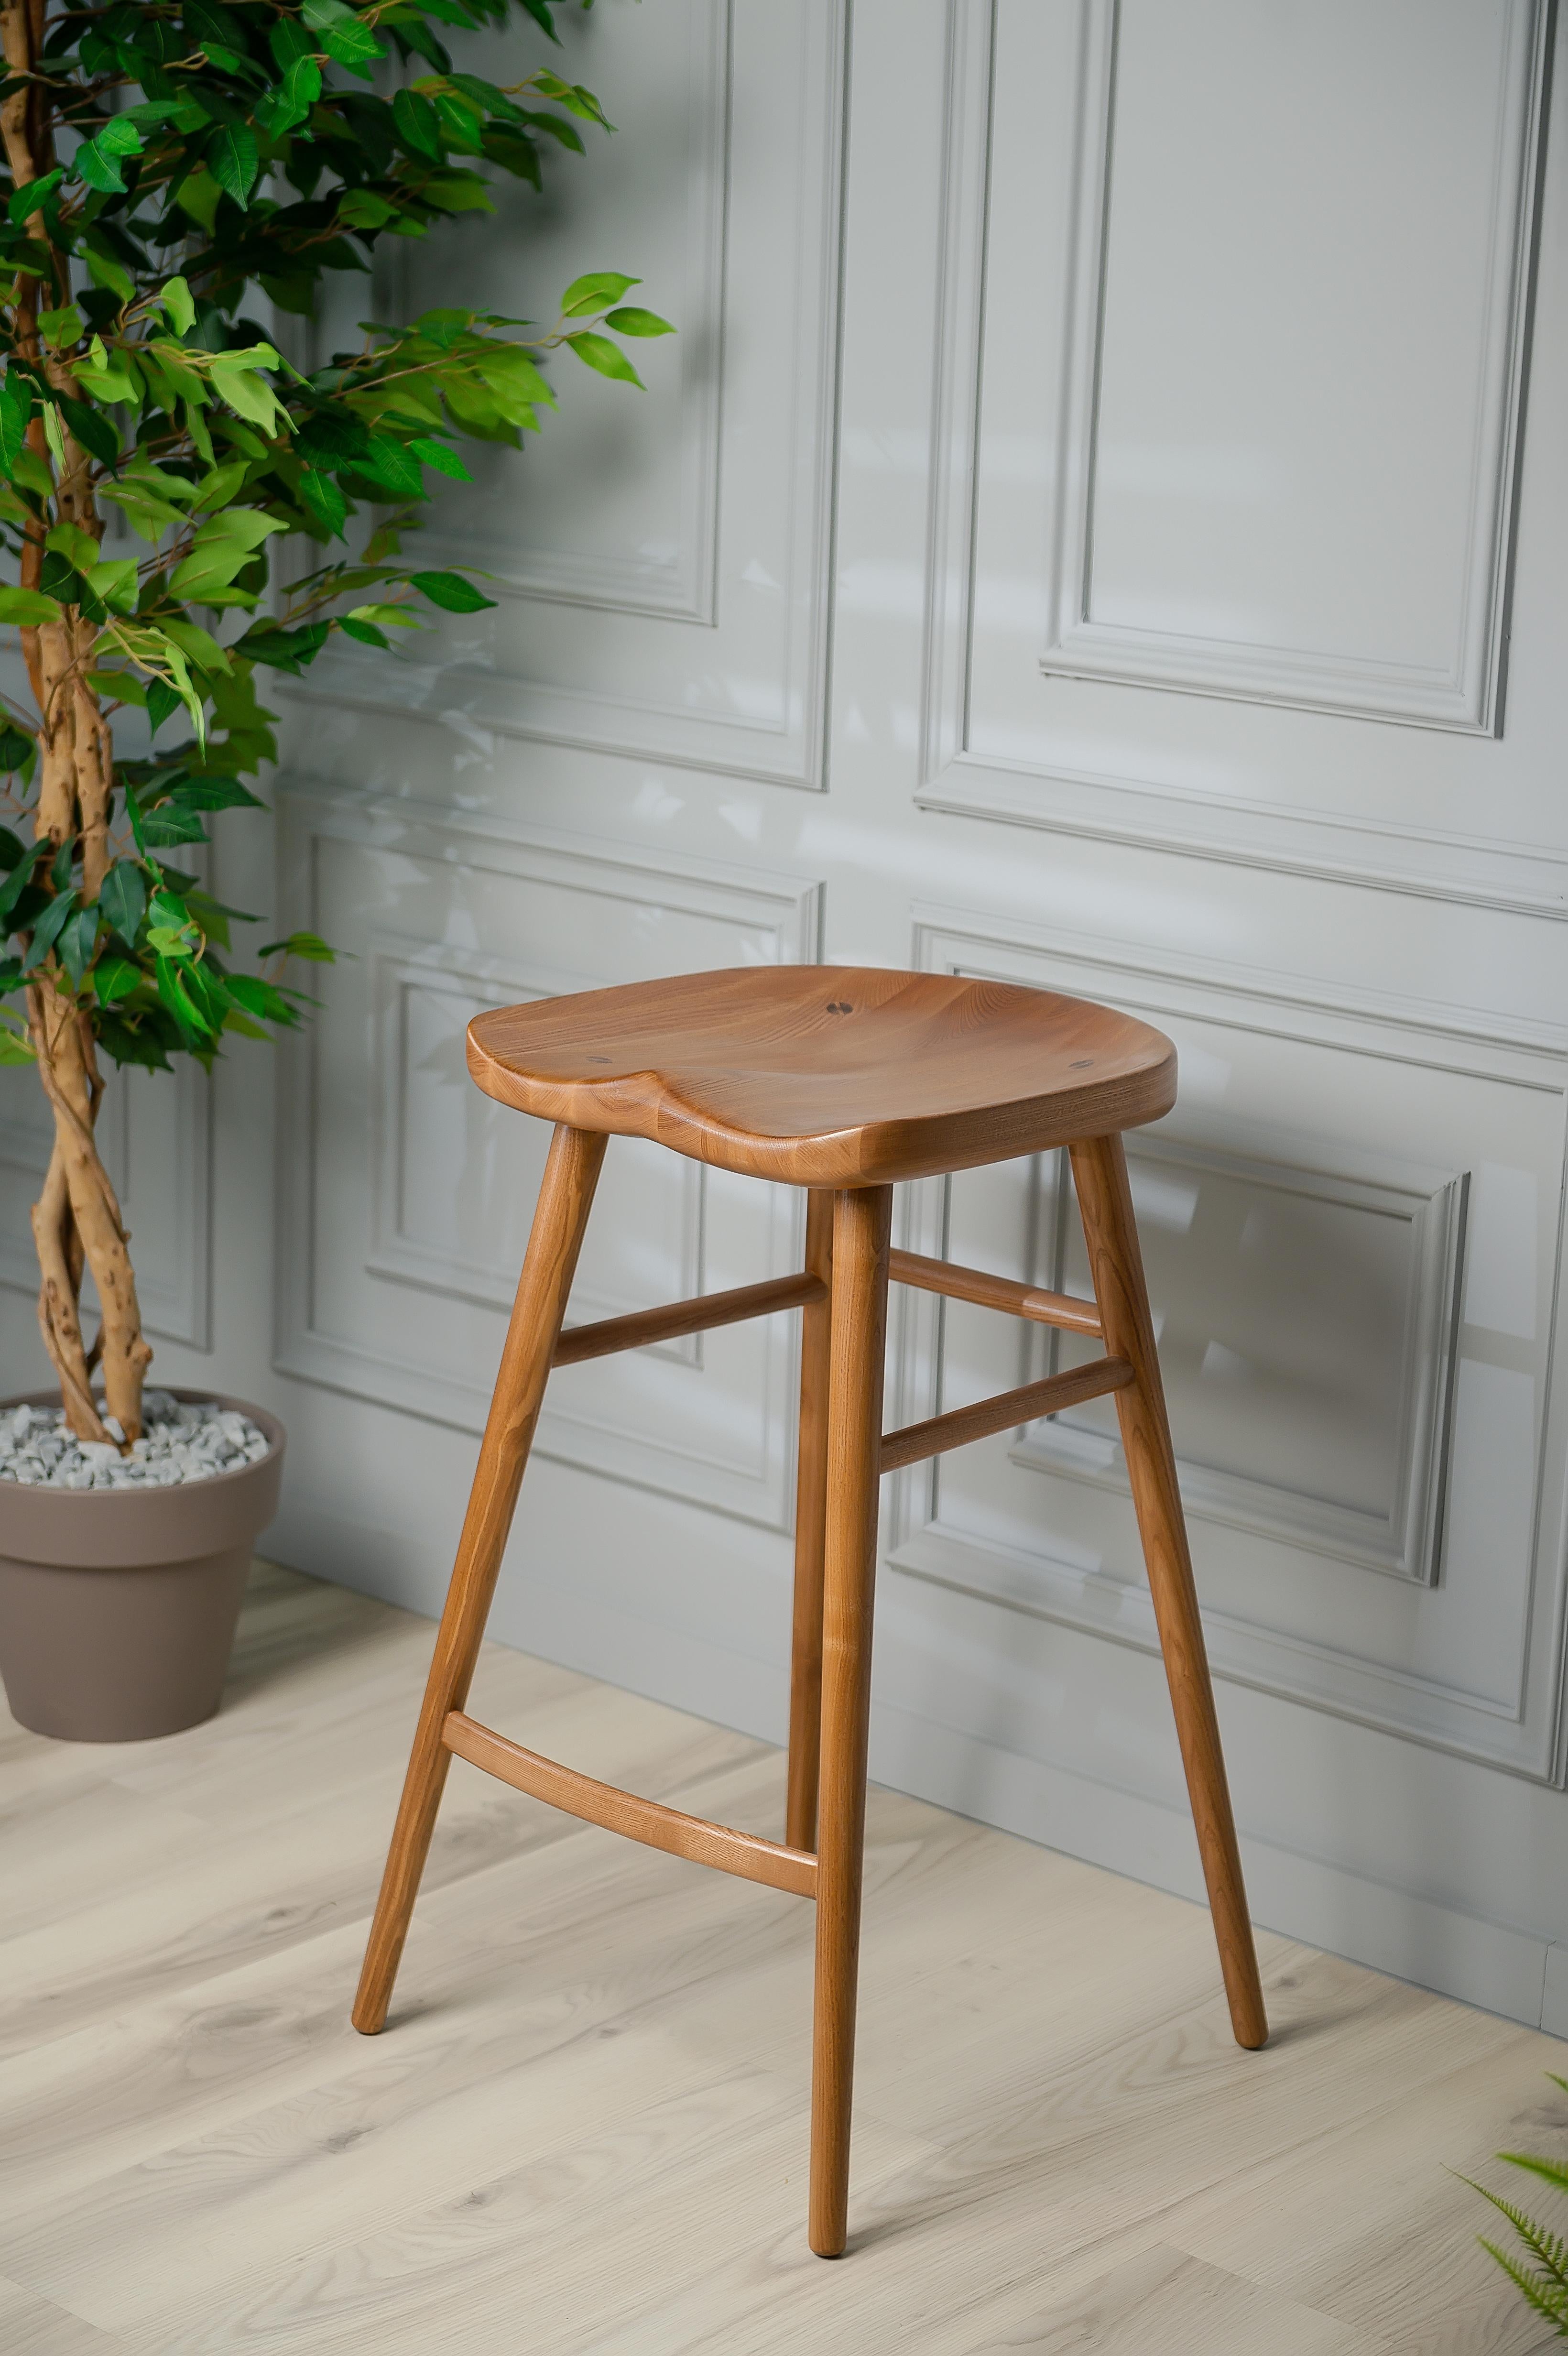 The Alma Bar Stool is perfect for any bar or leisure area of your mom. This modern stained bar stool will help to entertain guests while adding a style functionality that you can’t miss. Made with ash wood, the Alma Bar Stool will last generation